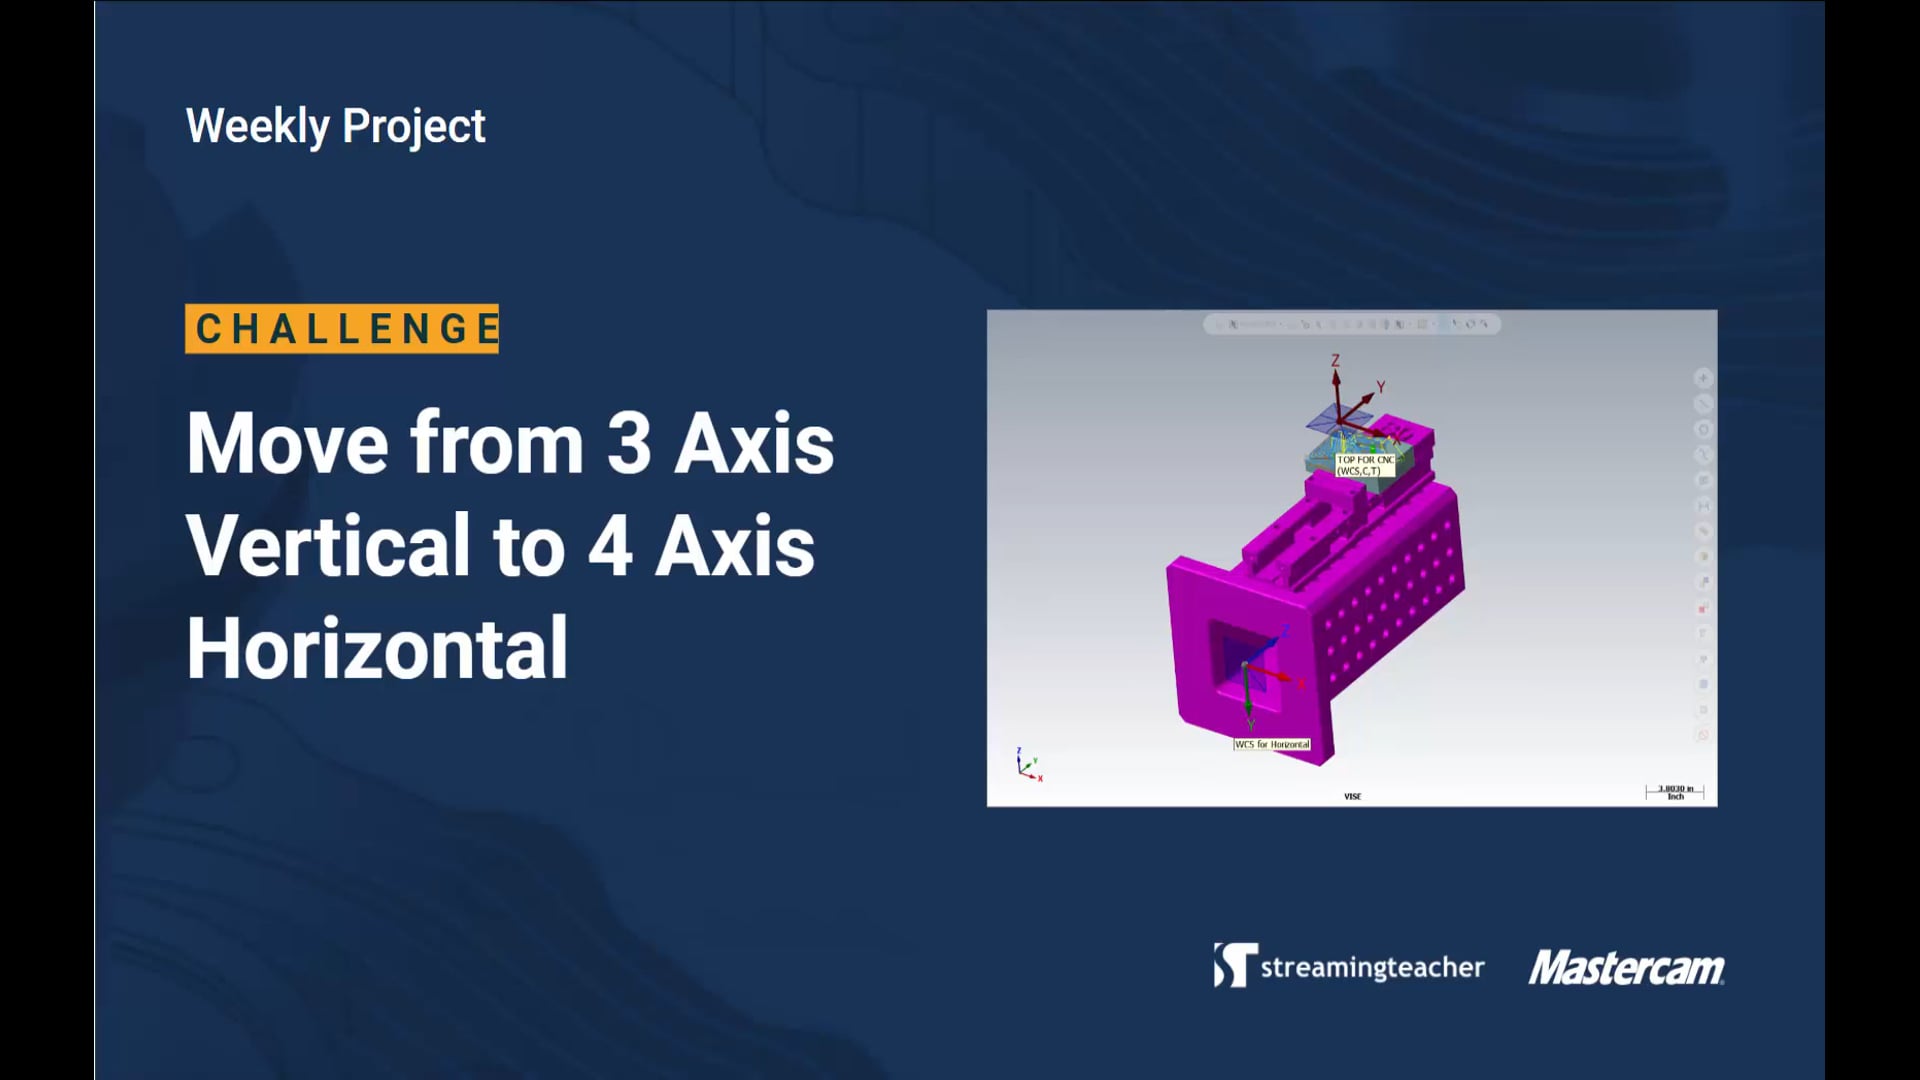 Move from 3 Axis Vertical to 4 Axis Horizontal